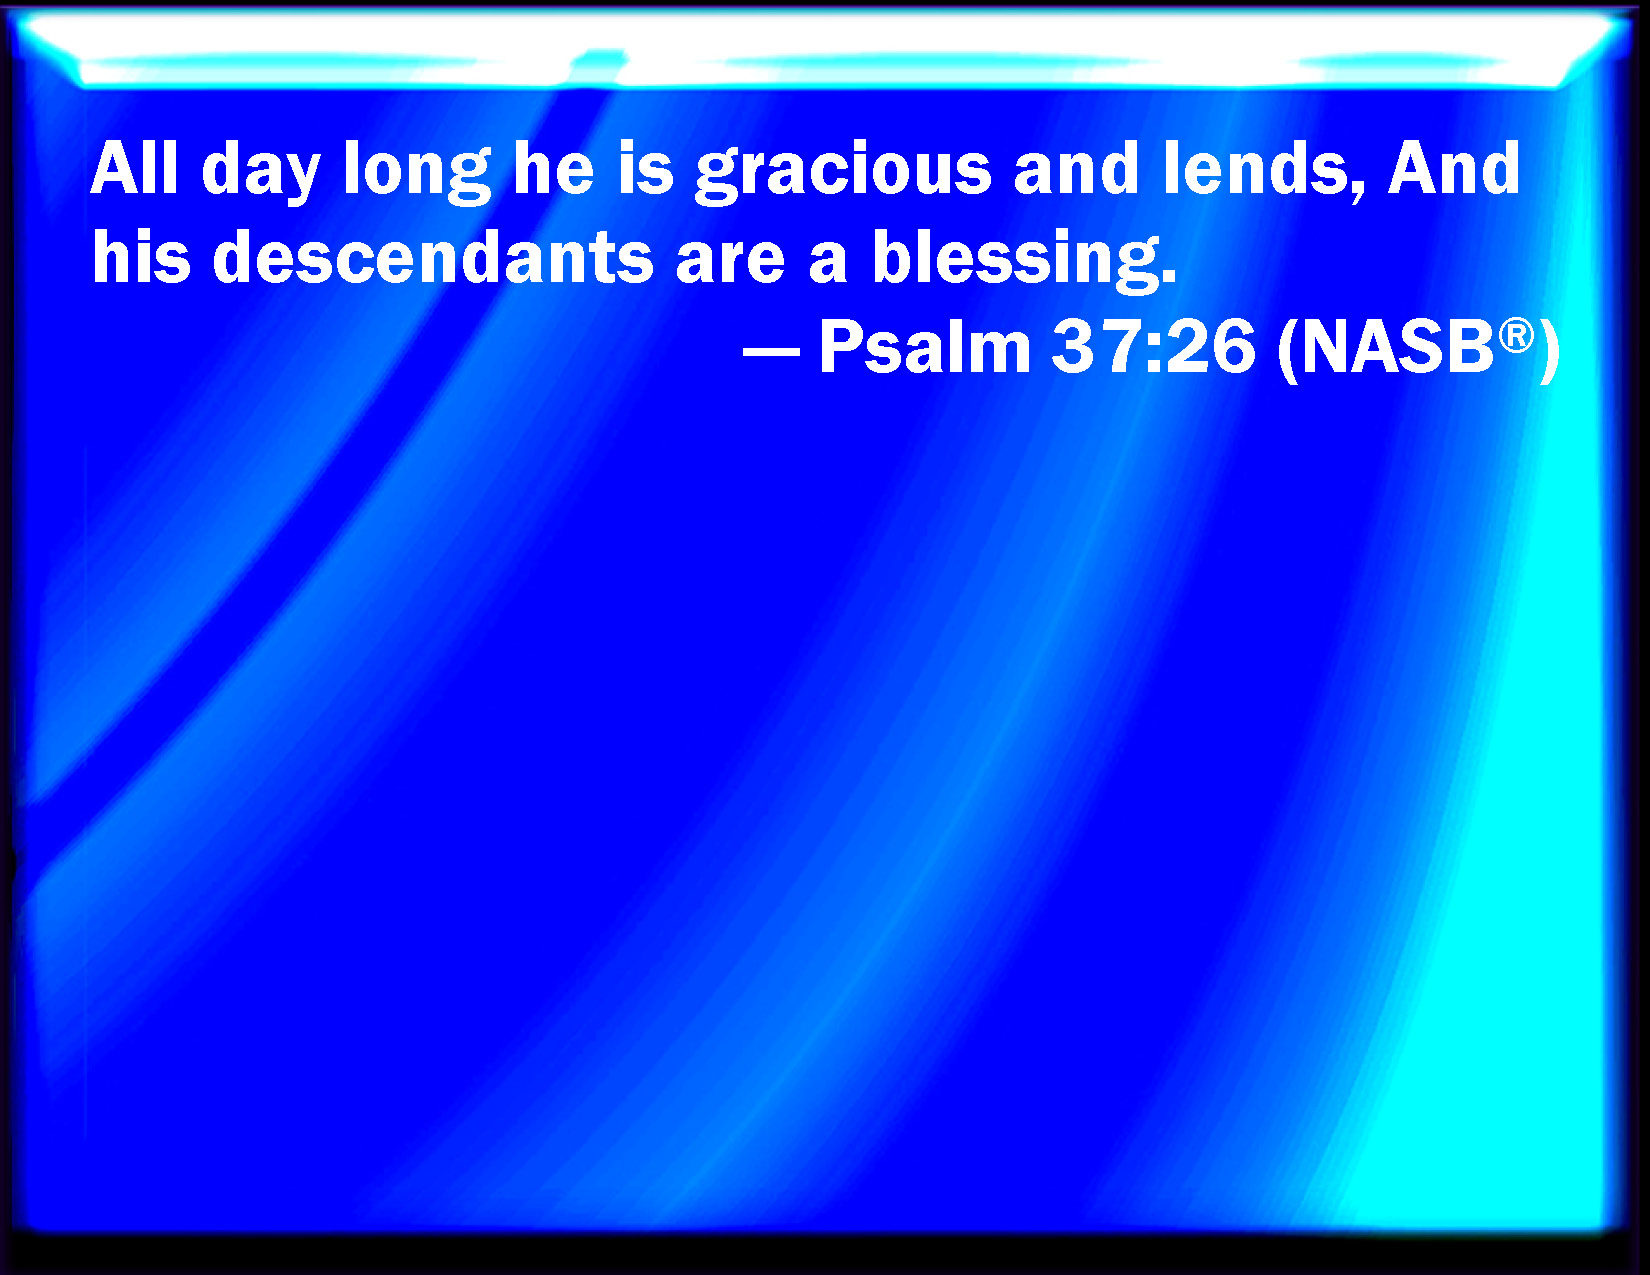 Psalm :26 He is ever merciful, and lends; and his seed is blessed.